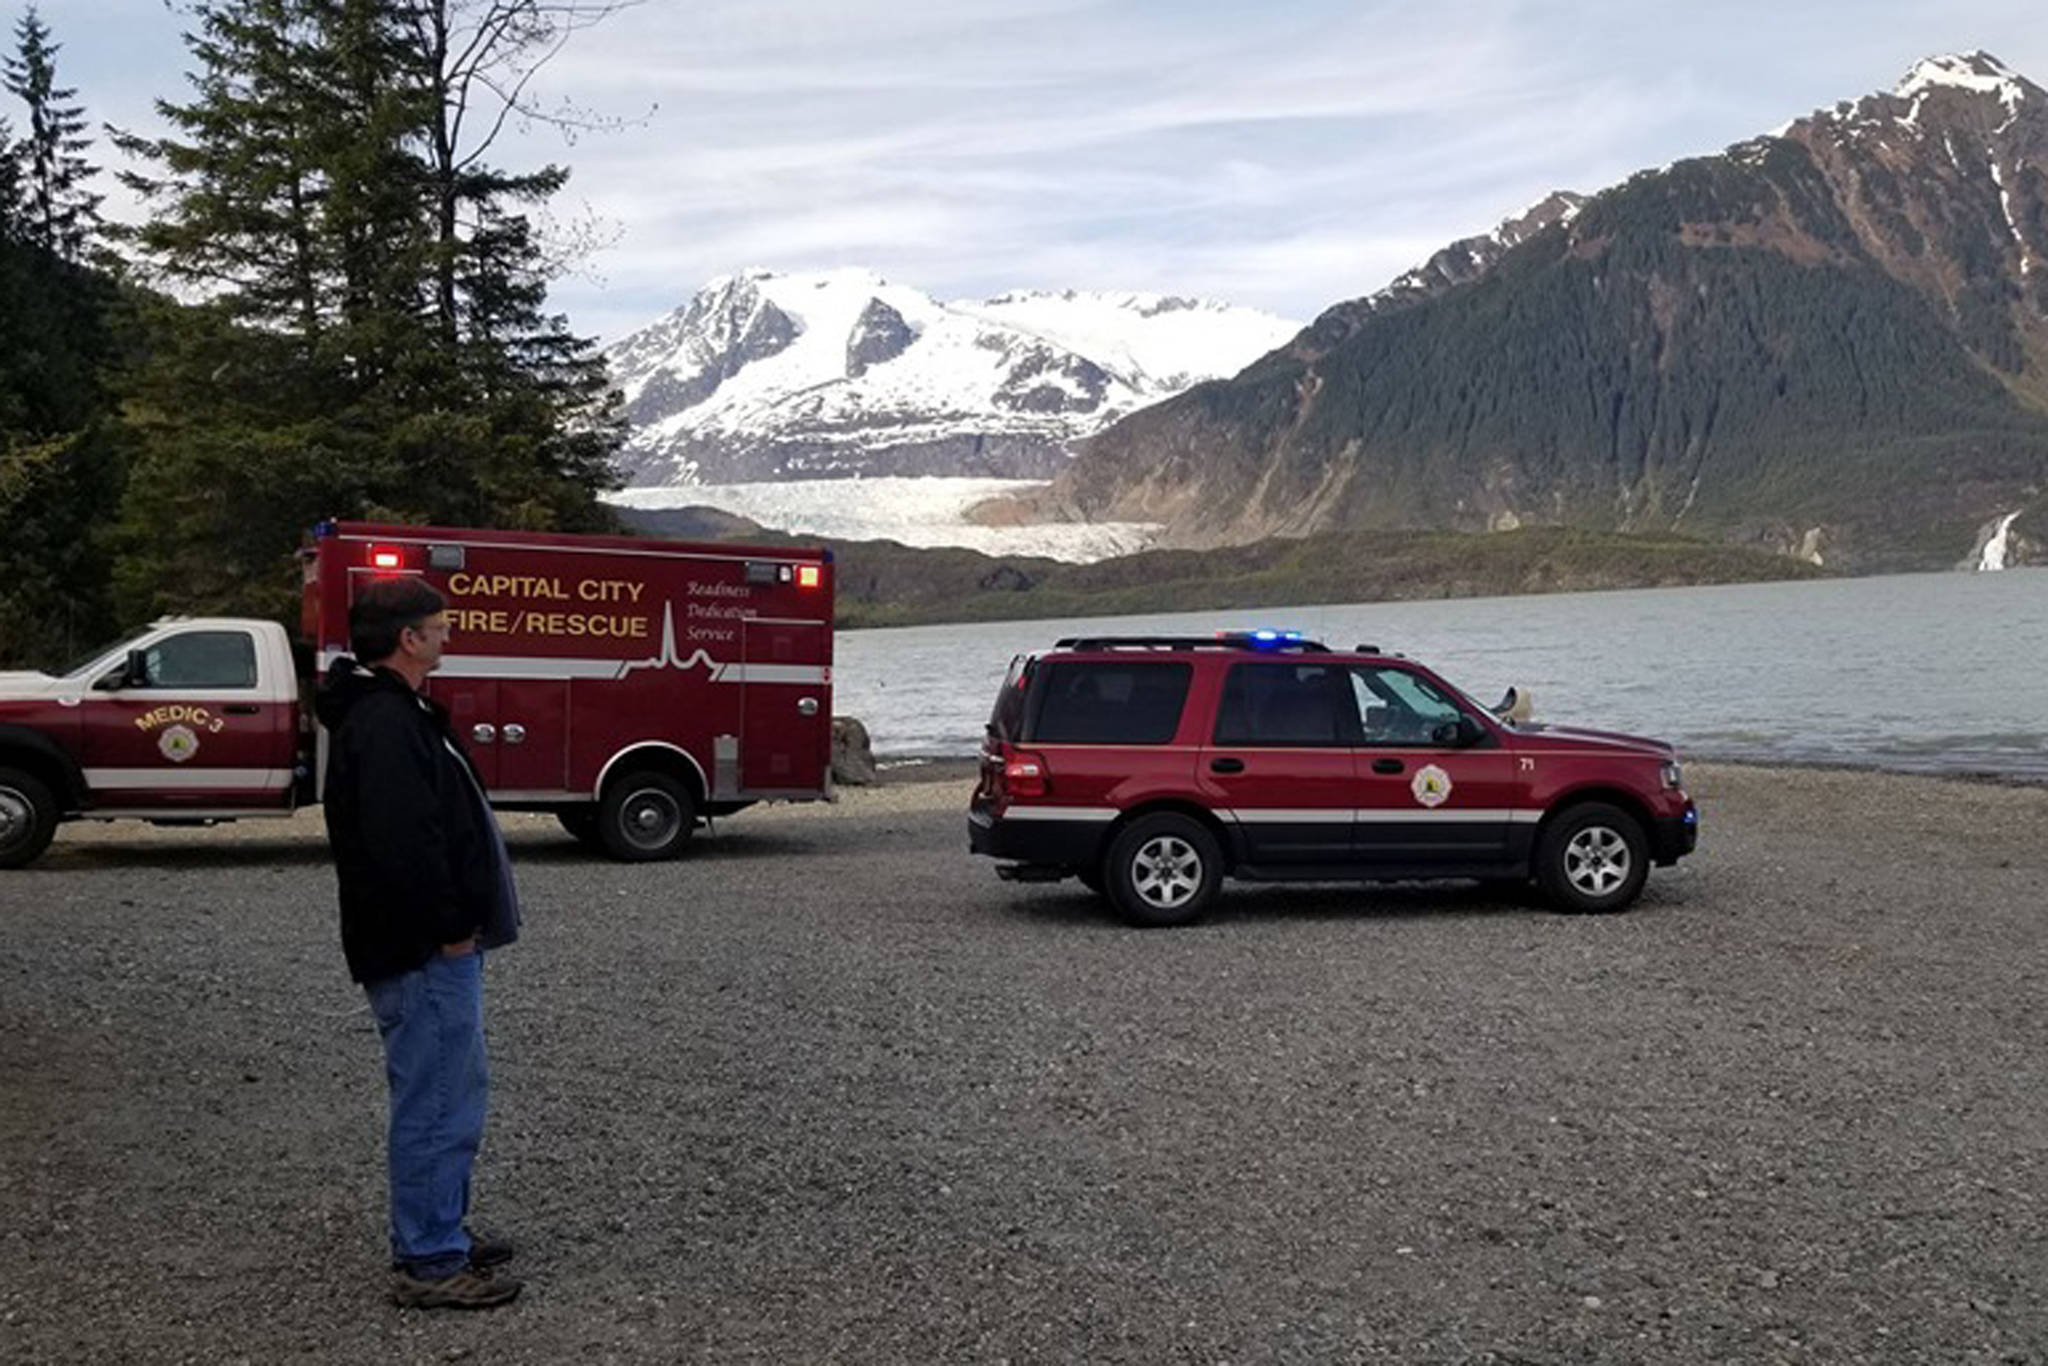 Capital City Fire/Rescue personnel await a kayaker who ended up in the water near the Mendenhall Glacier on Monday, May 13, 2019. (Courtesy photo | Capital City Fire/Rescue)